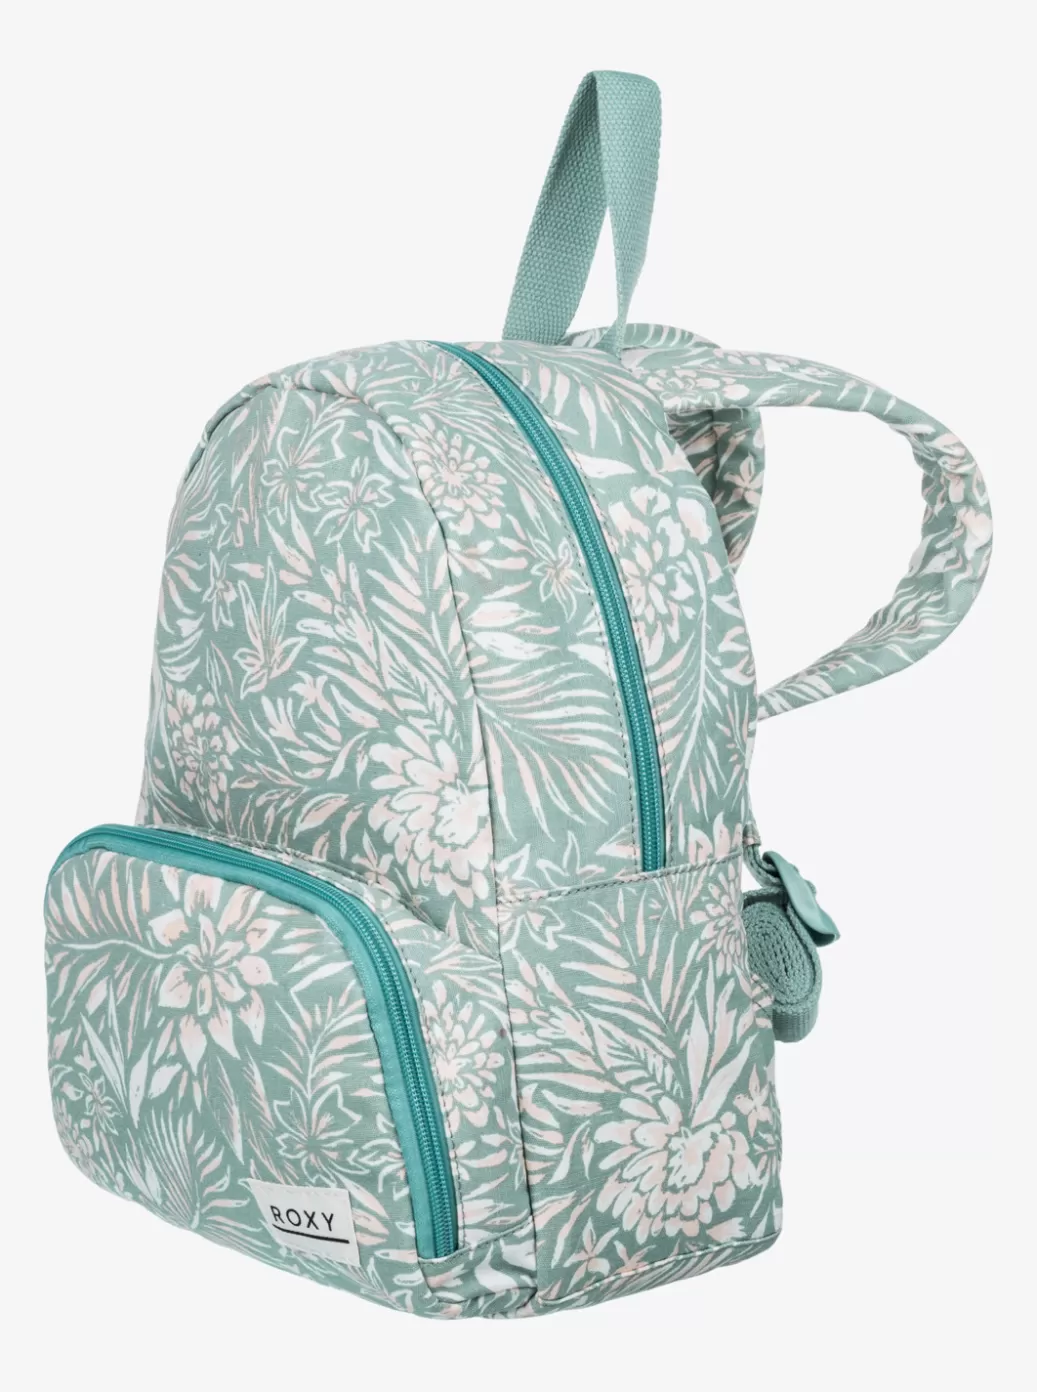 Backpacks | WOMEN ROXY Always Core Canvas 8L Extra Small Backpack Blue Surf Planao Apparel